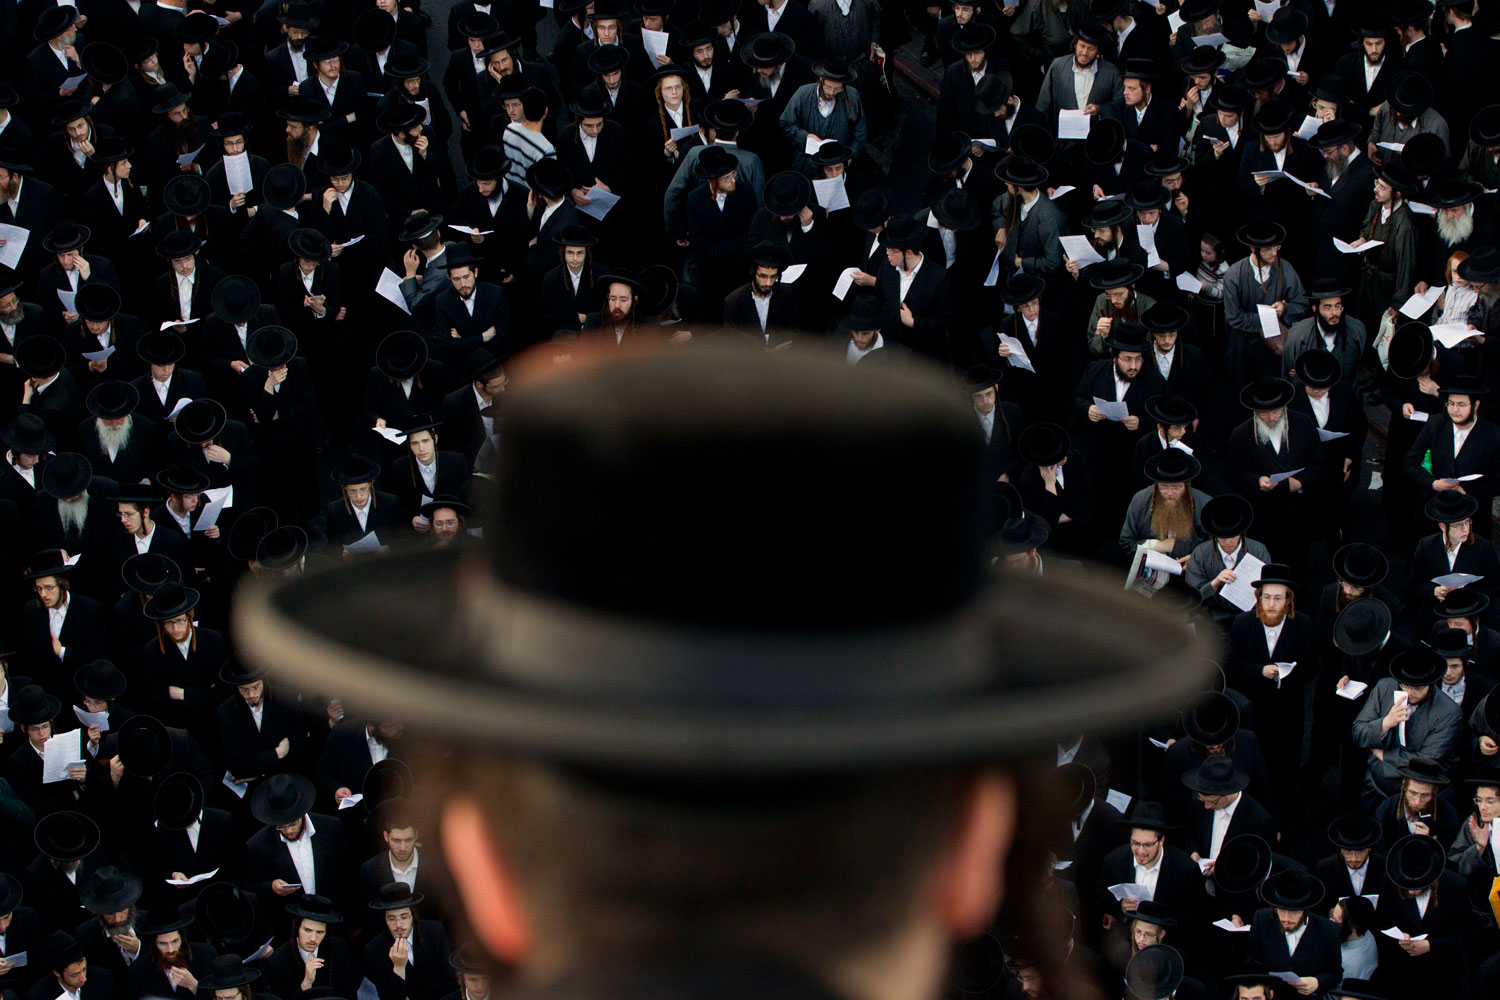 August 11, 2011. Ultra-Orthodox Jews attend a prayer as they gather in the religious neighborhood of Mea Shearim to protest against summer events organized by the city council, Jerusalem.